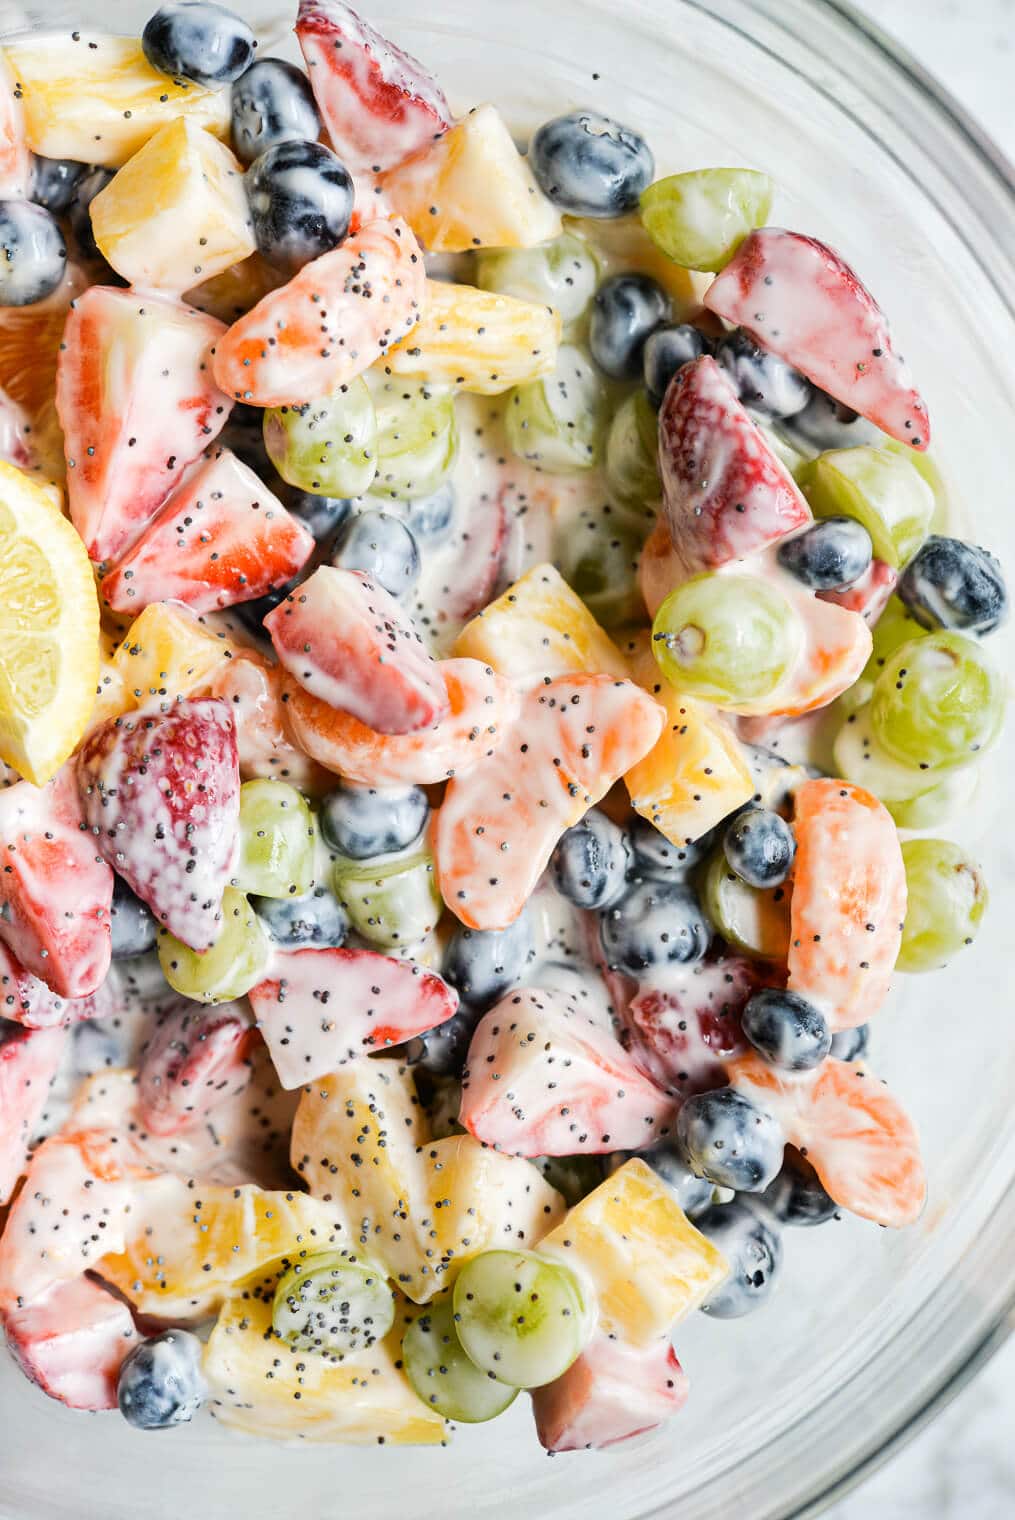 ready to eat yogurt fruit salad in a large glass bowl on a marble surface